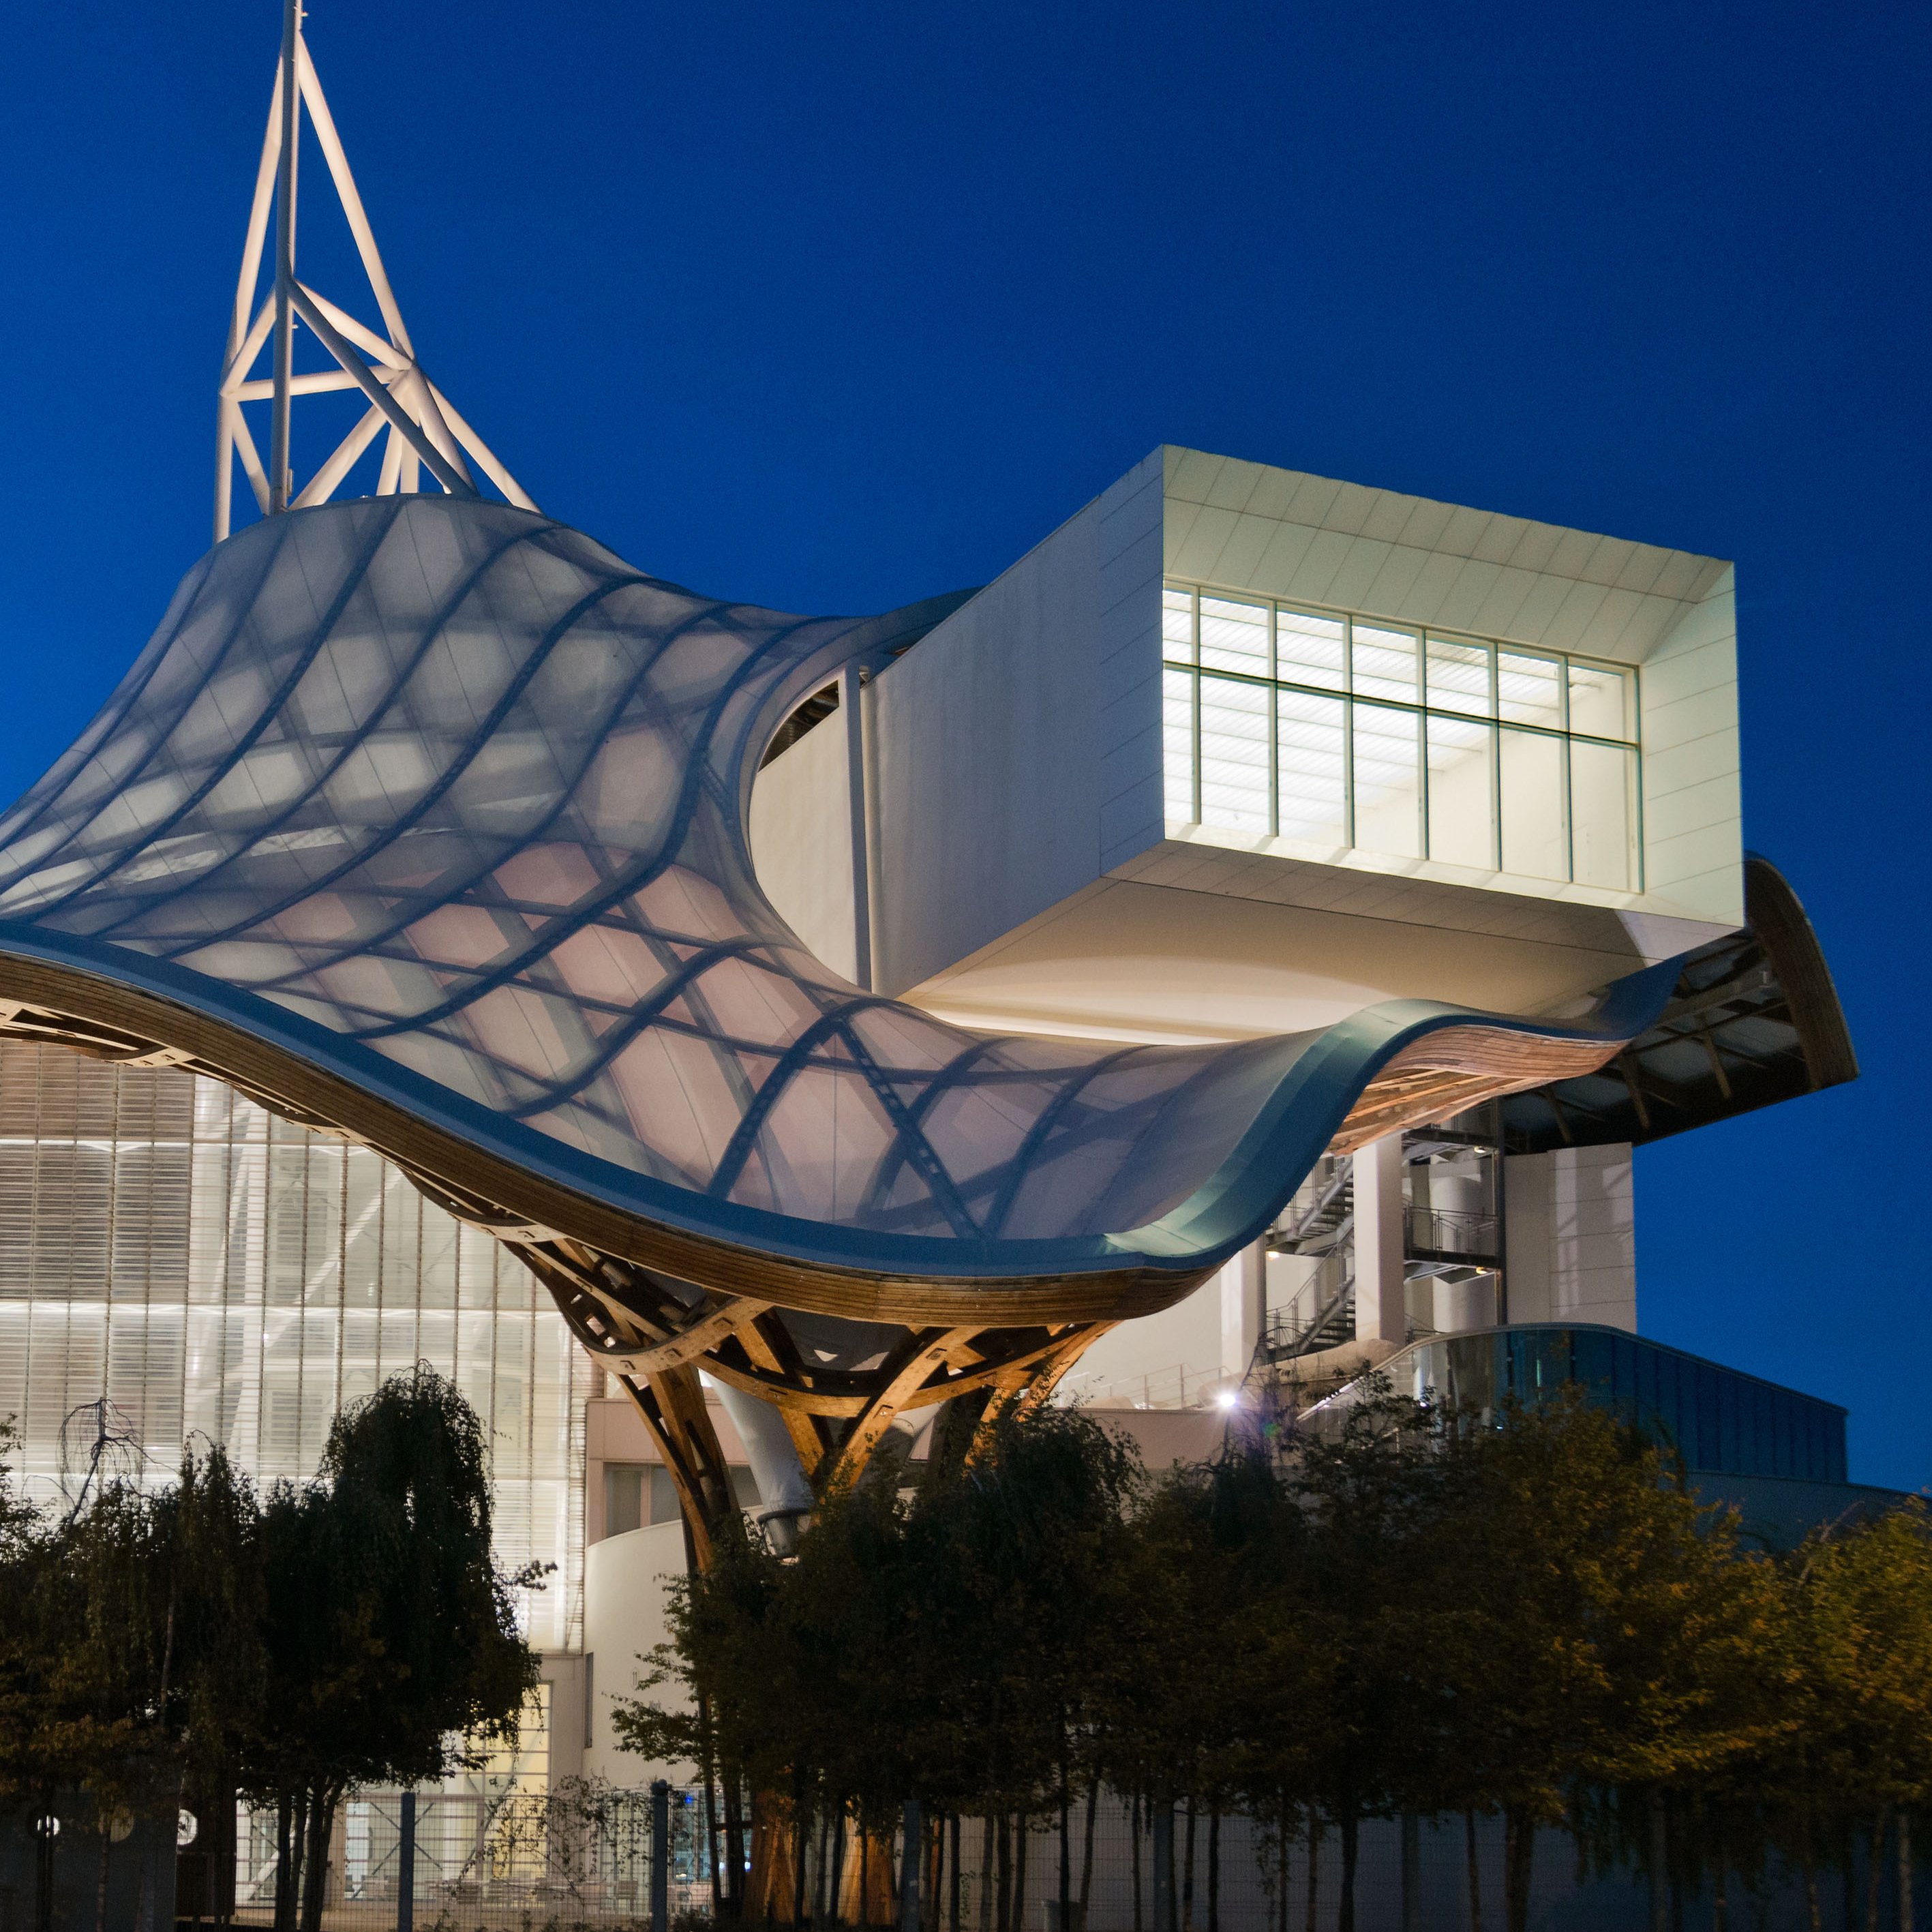 View of the outside of the Centre Pompidou-Metz building at night